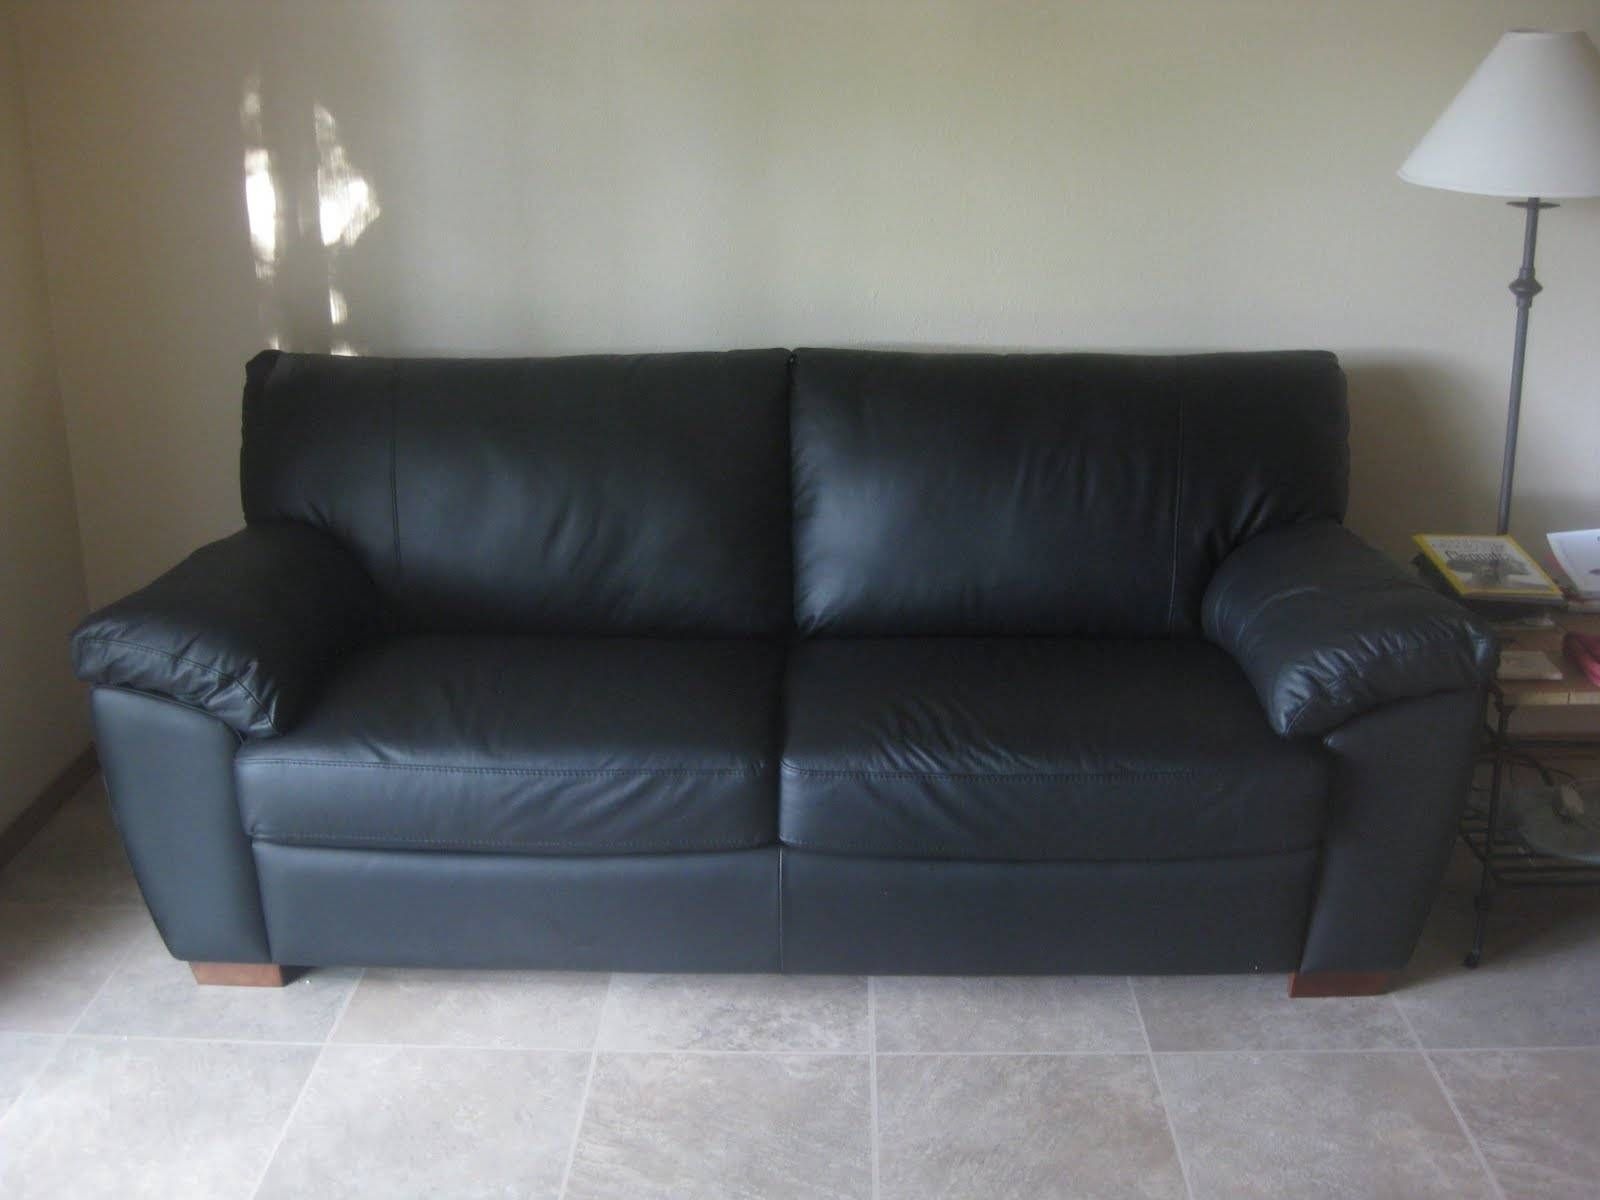 Small Black Leather Loveseat On Ceramic Floor Tile Of 15 Cute Within Small Black Sofas (View 15 of 15)